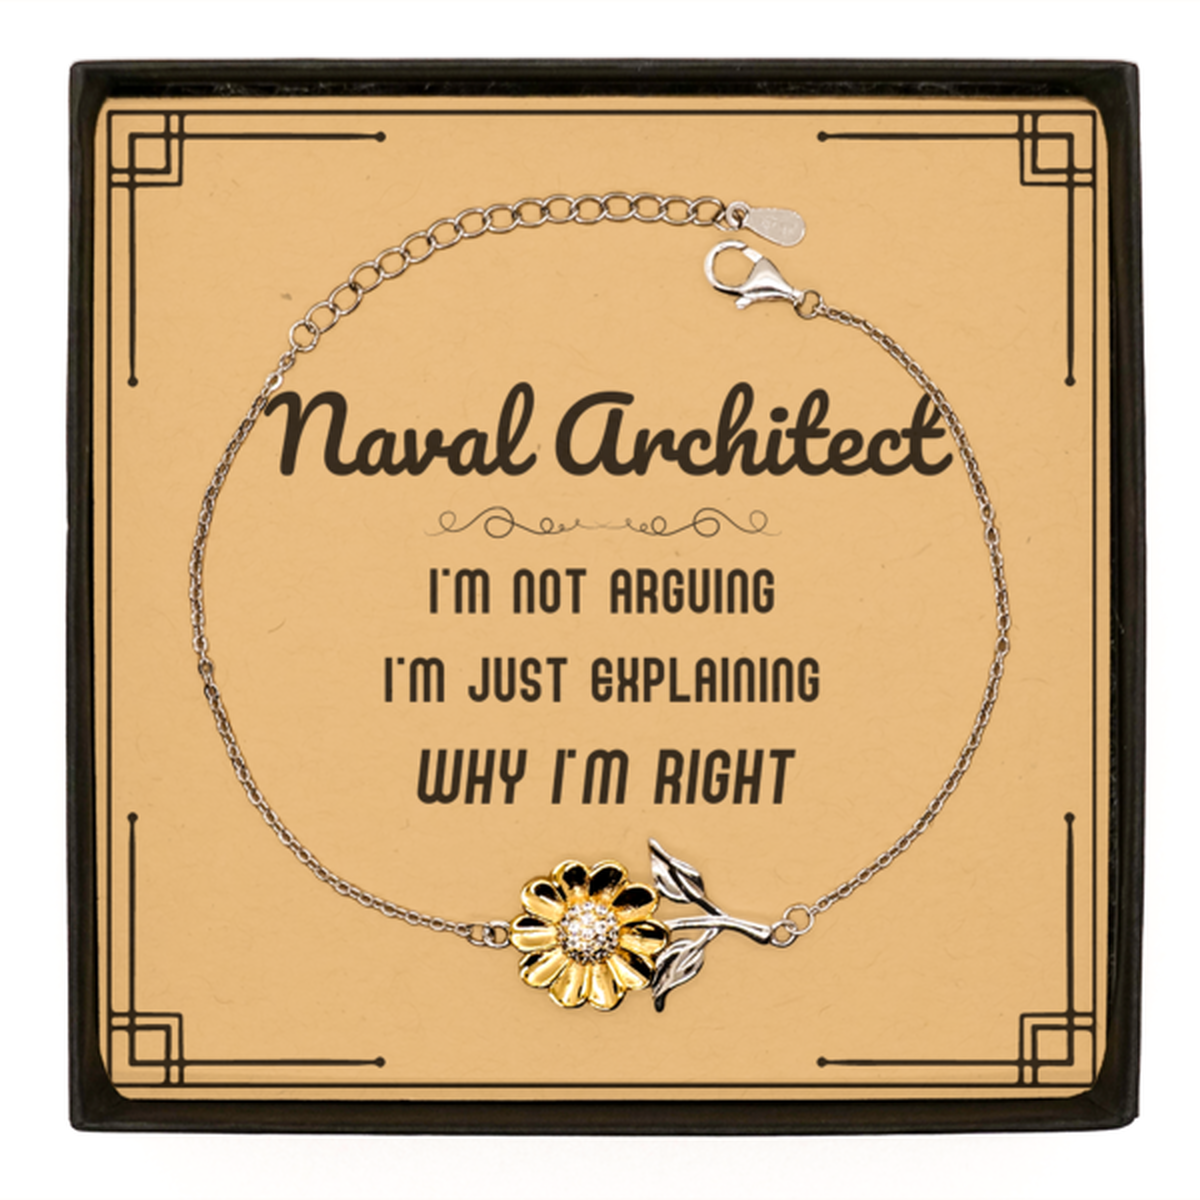 Naval Architect I'm not Arguing. I'm Just Explaining Why I'm RIGHT Sunflower Bracelet, Funny Saying Quote Naval Architect Gifts For Naval Architect Message Card Graduation Birthday Christmas Gifts for Men Women Coworker